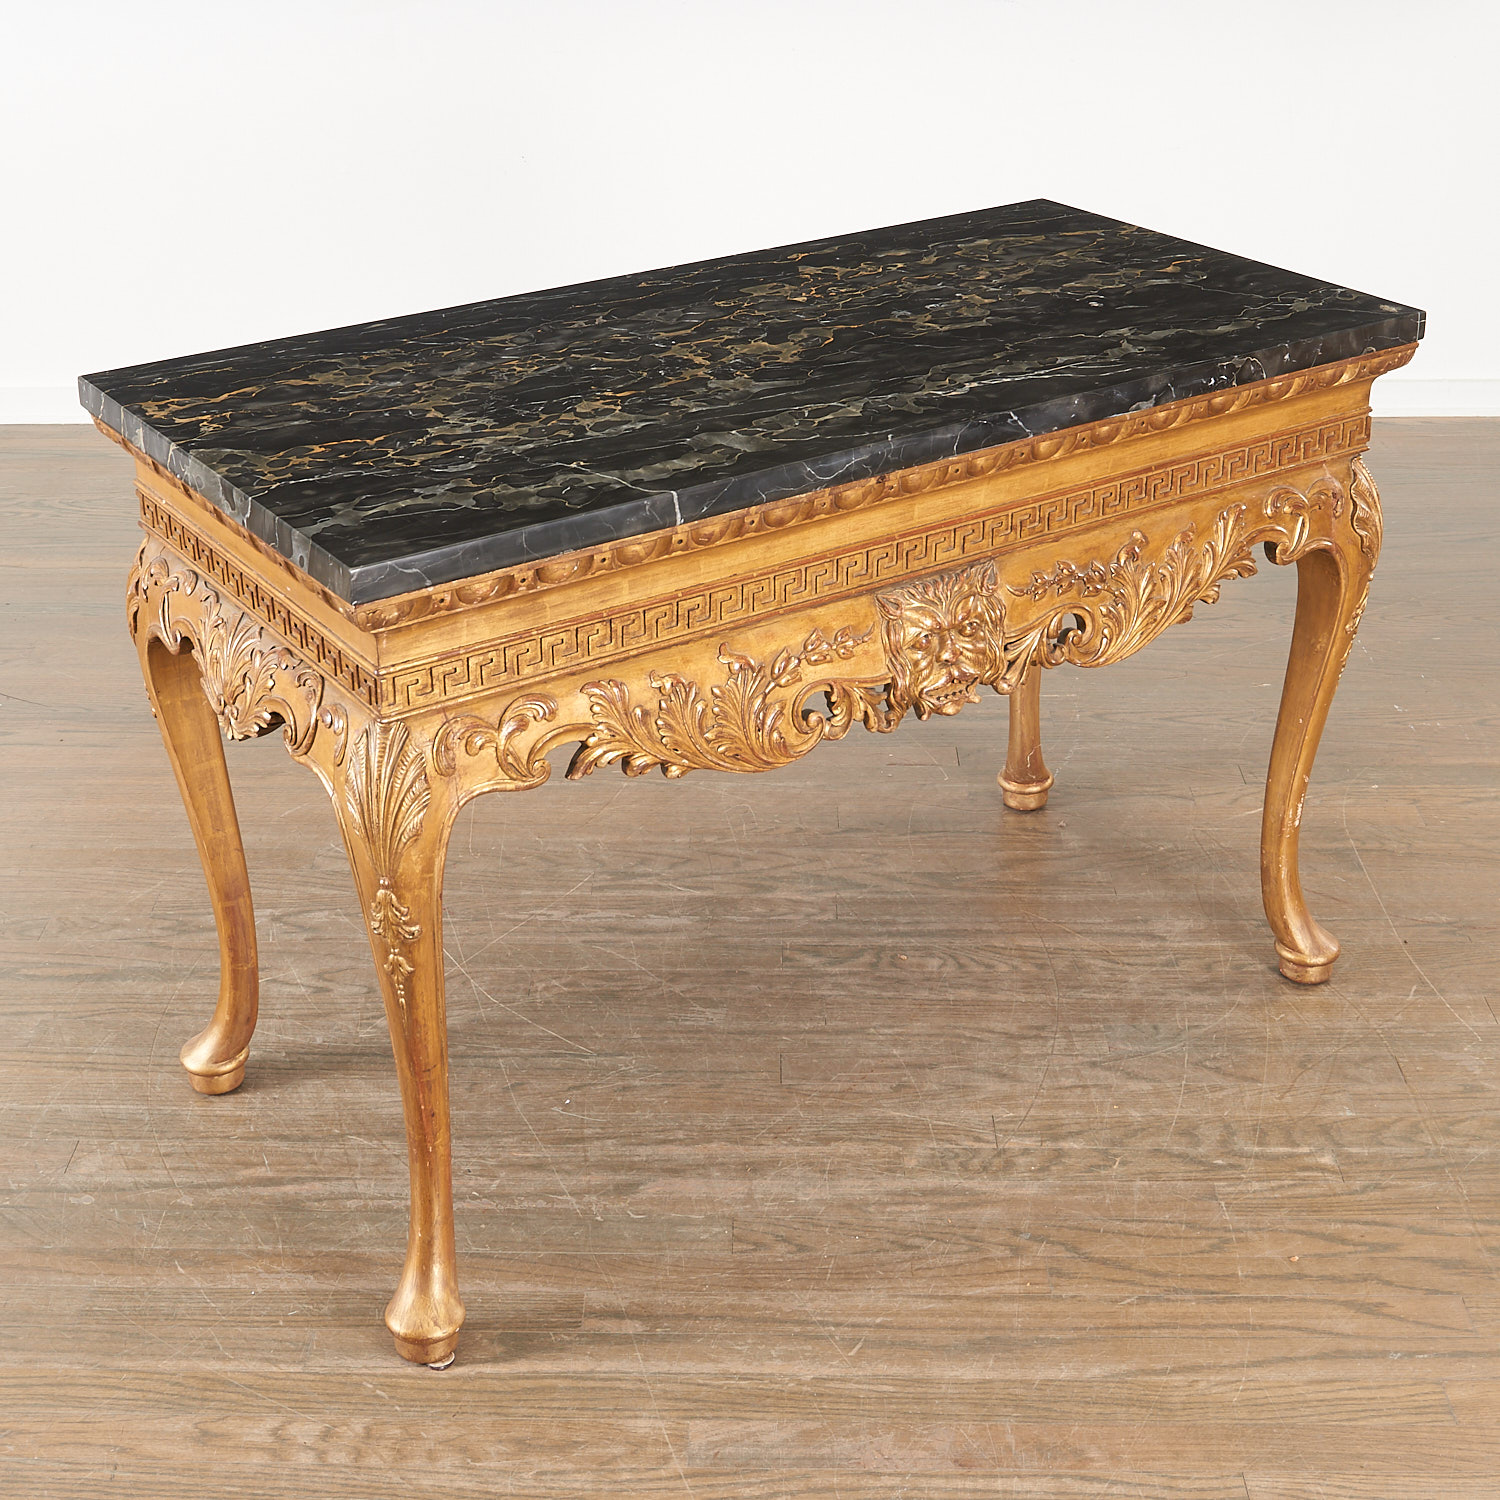 ANTIQUE GEORGE II STYLE GILTWOOD